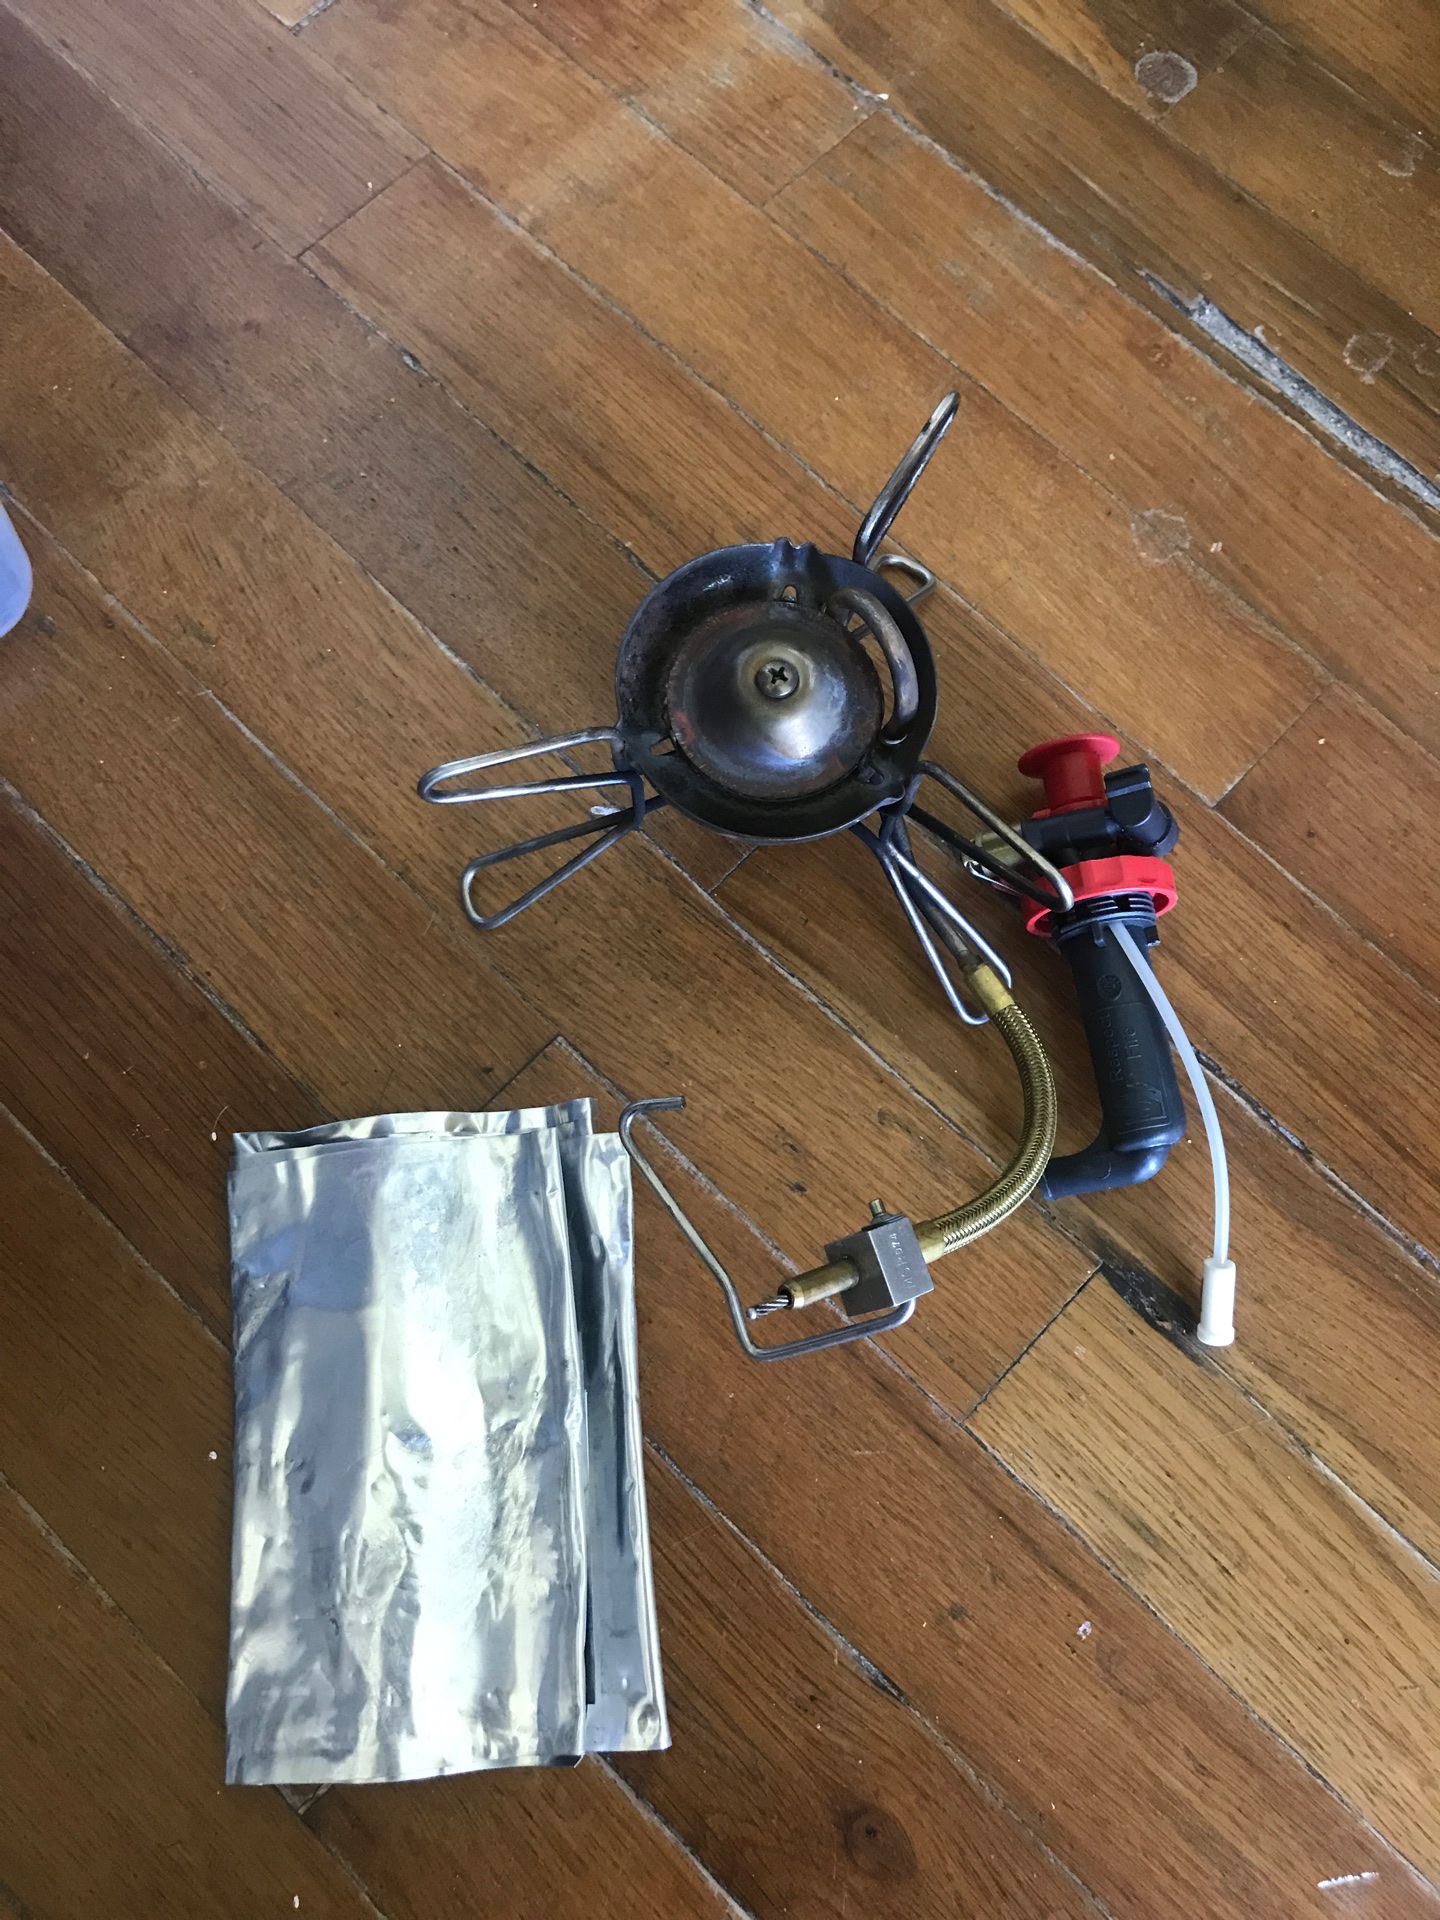 MSR camping backpacking stove.